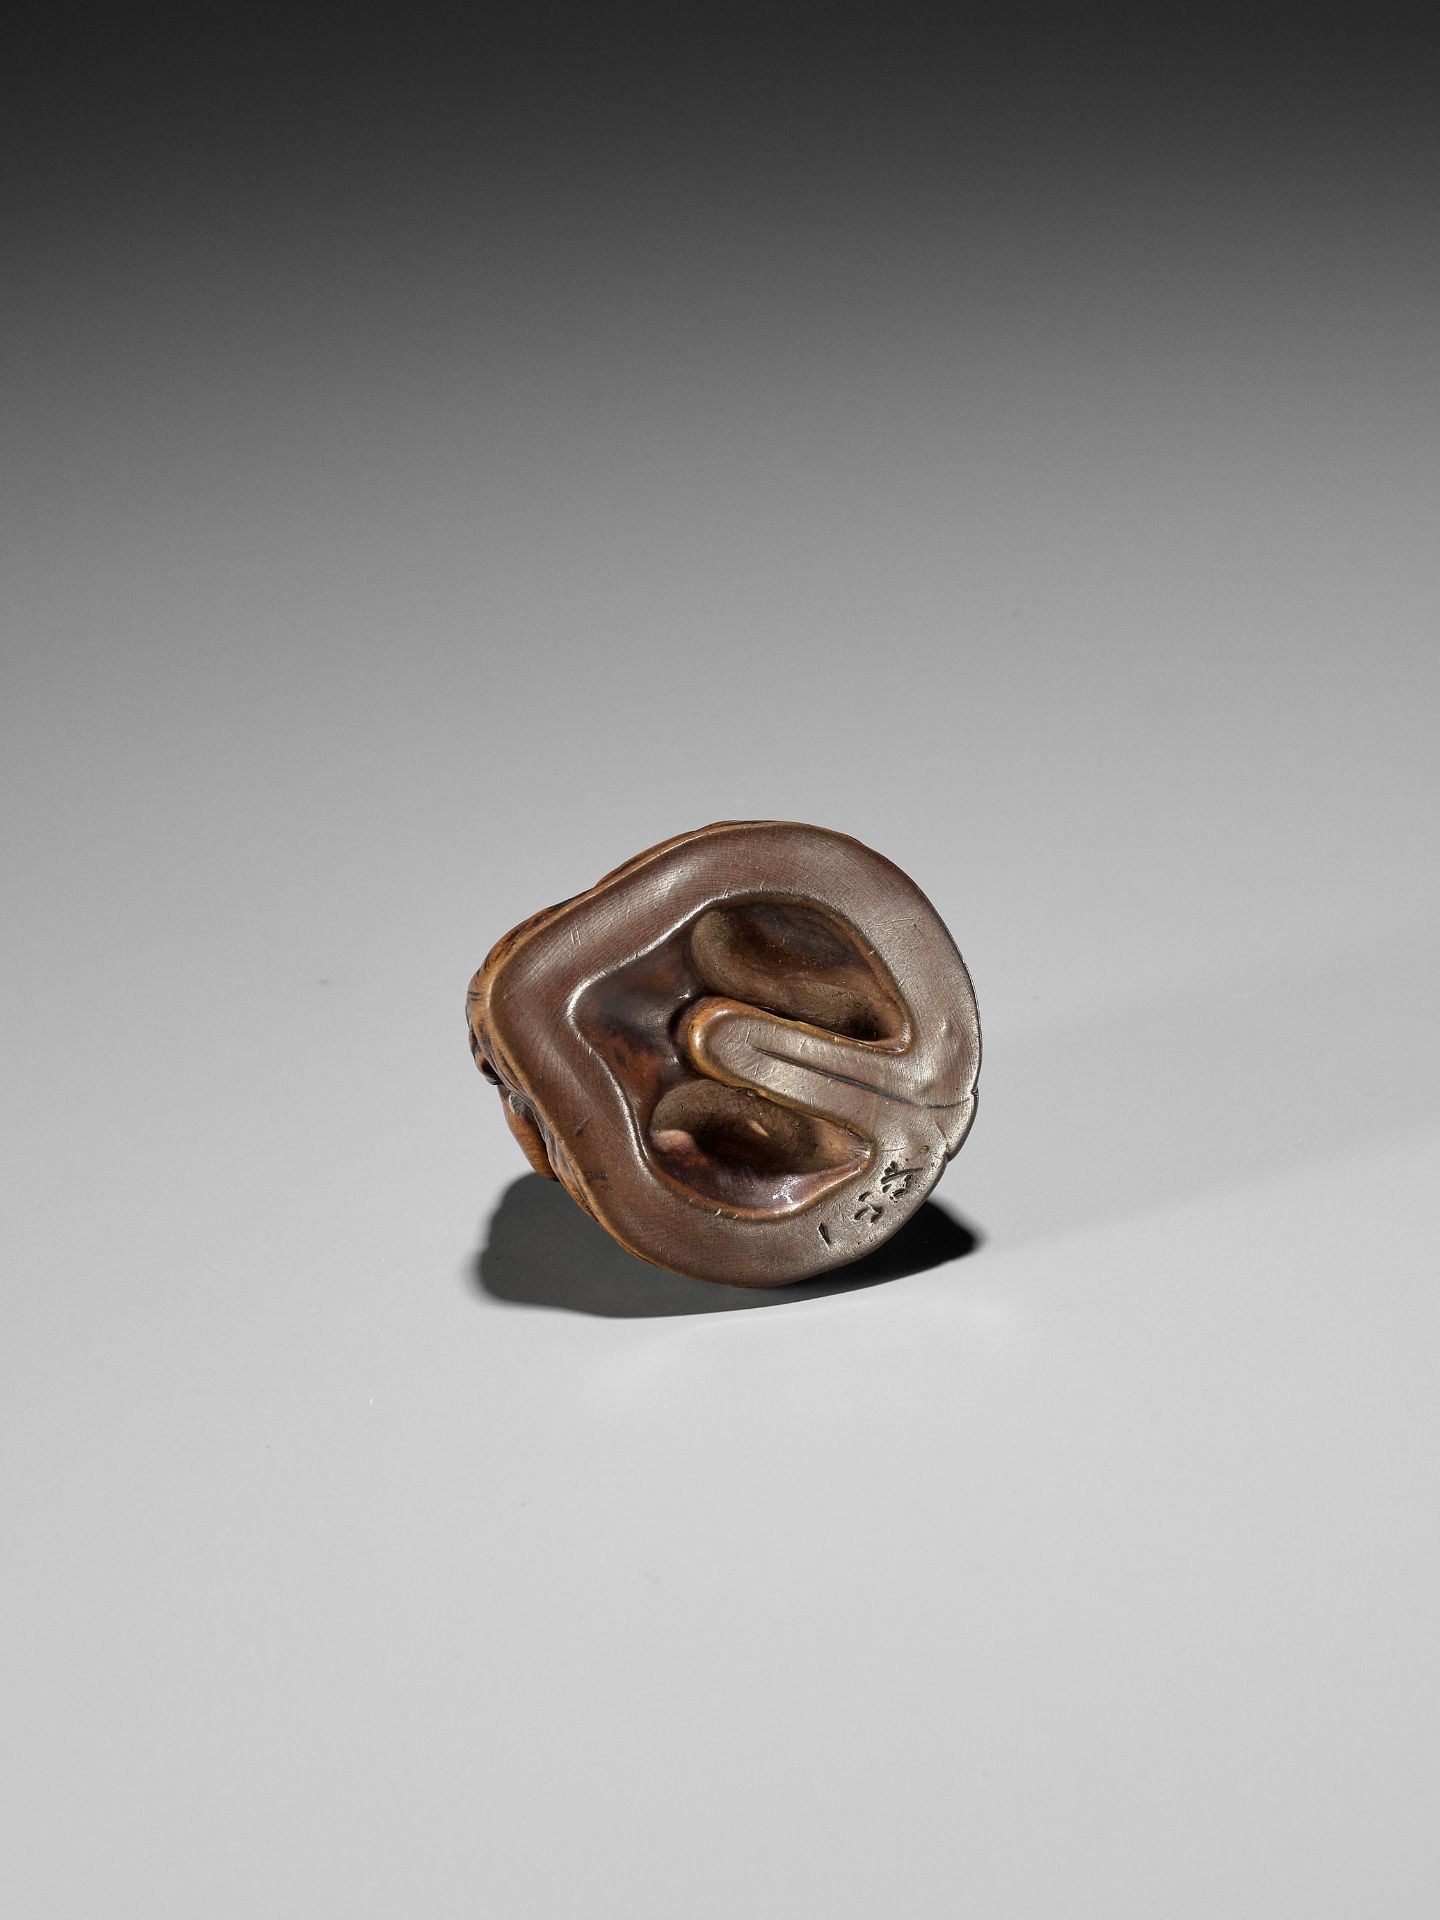 ISSAN: A WOOD NETSUKE OF TWO TOADS ON A WALNUT - Image 3 of 11